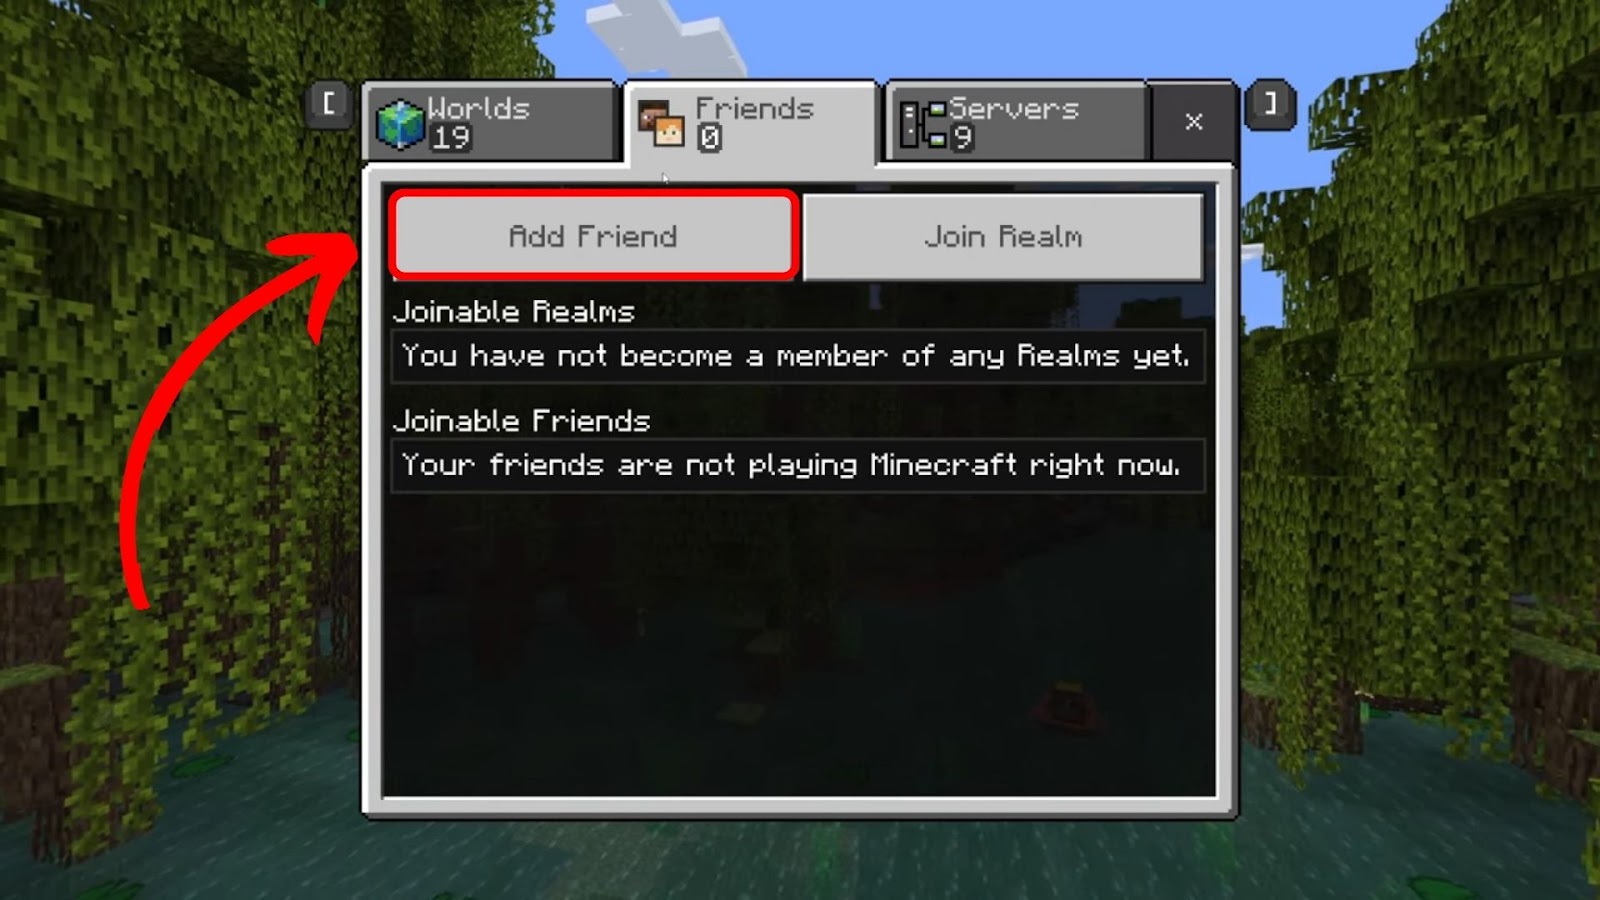 Press Add Friend To Join Minecraft World on PS4